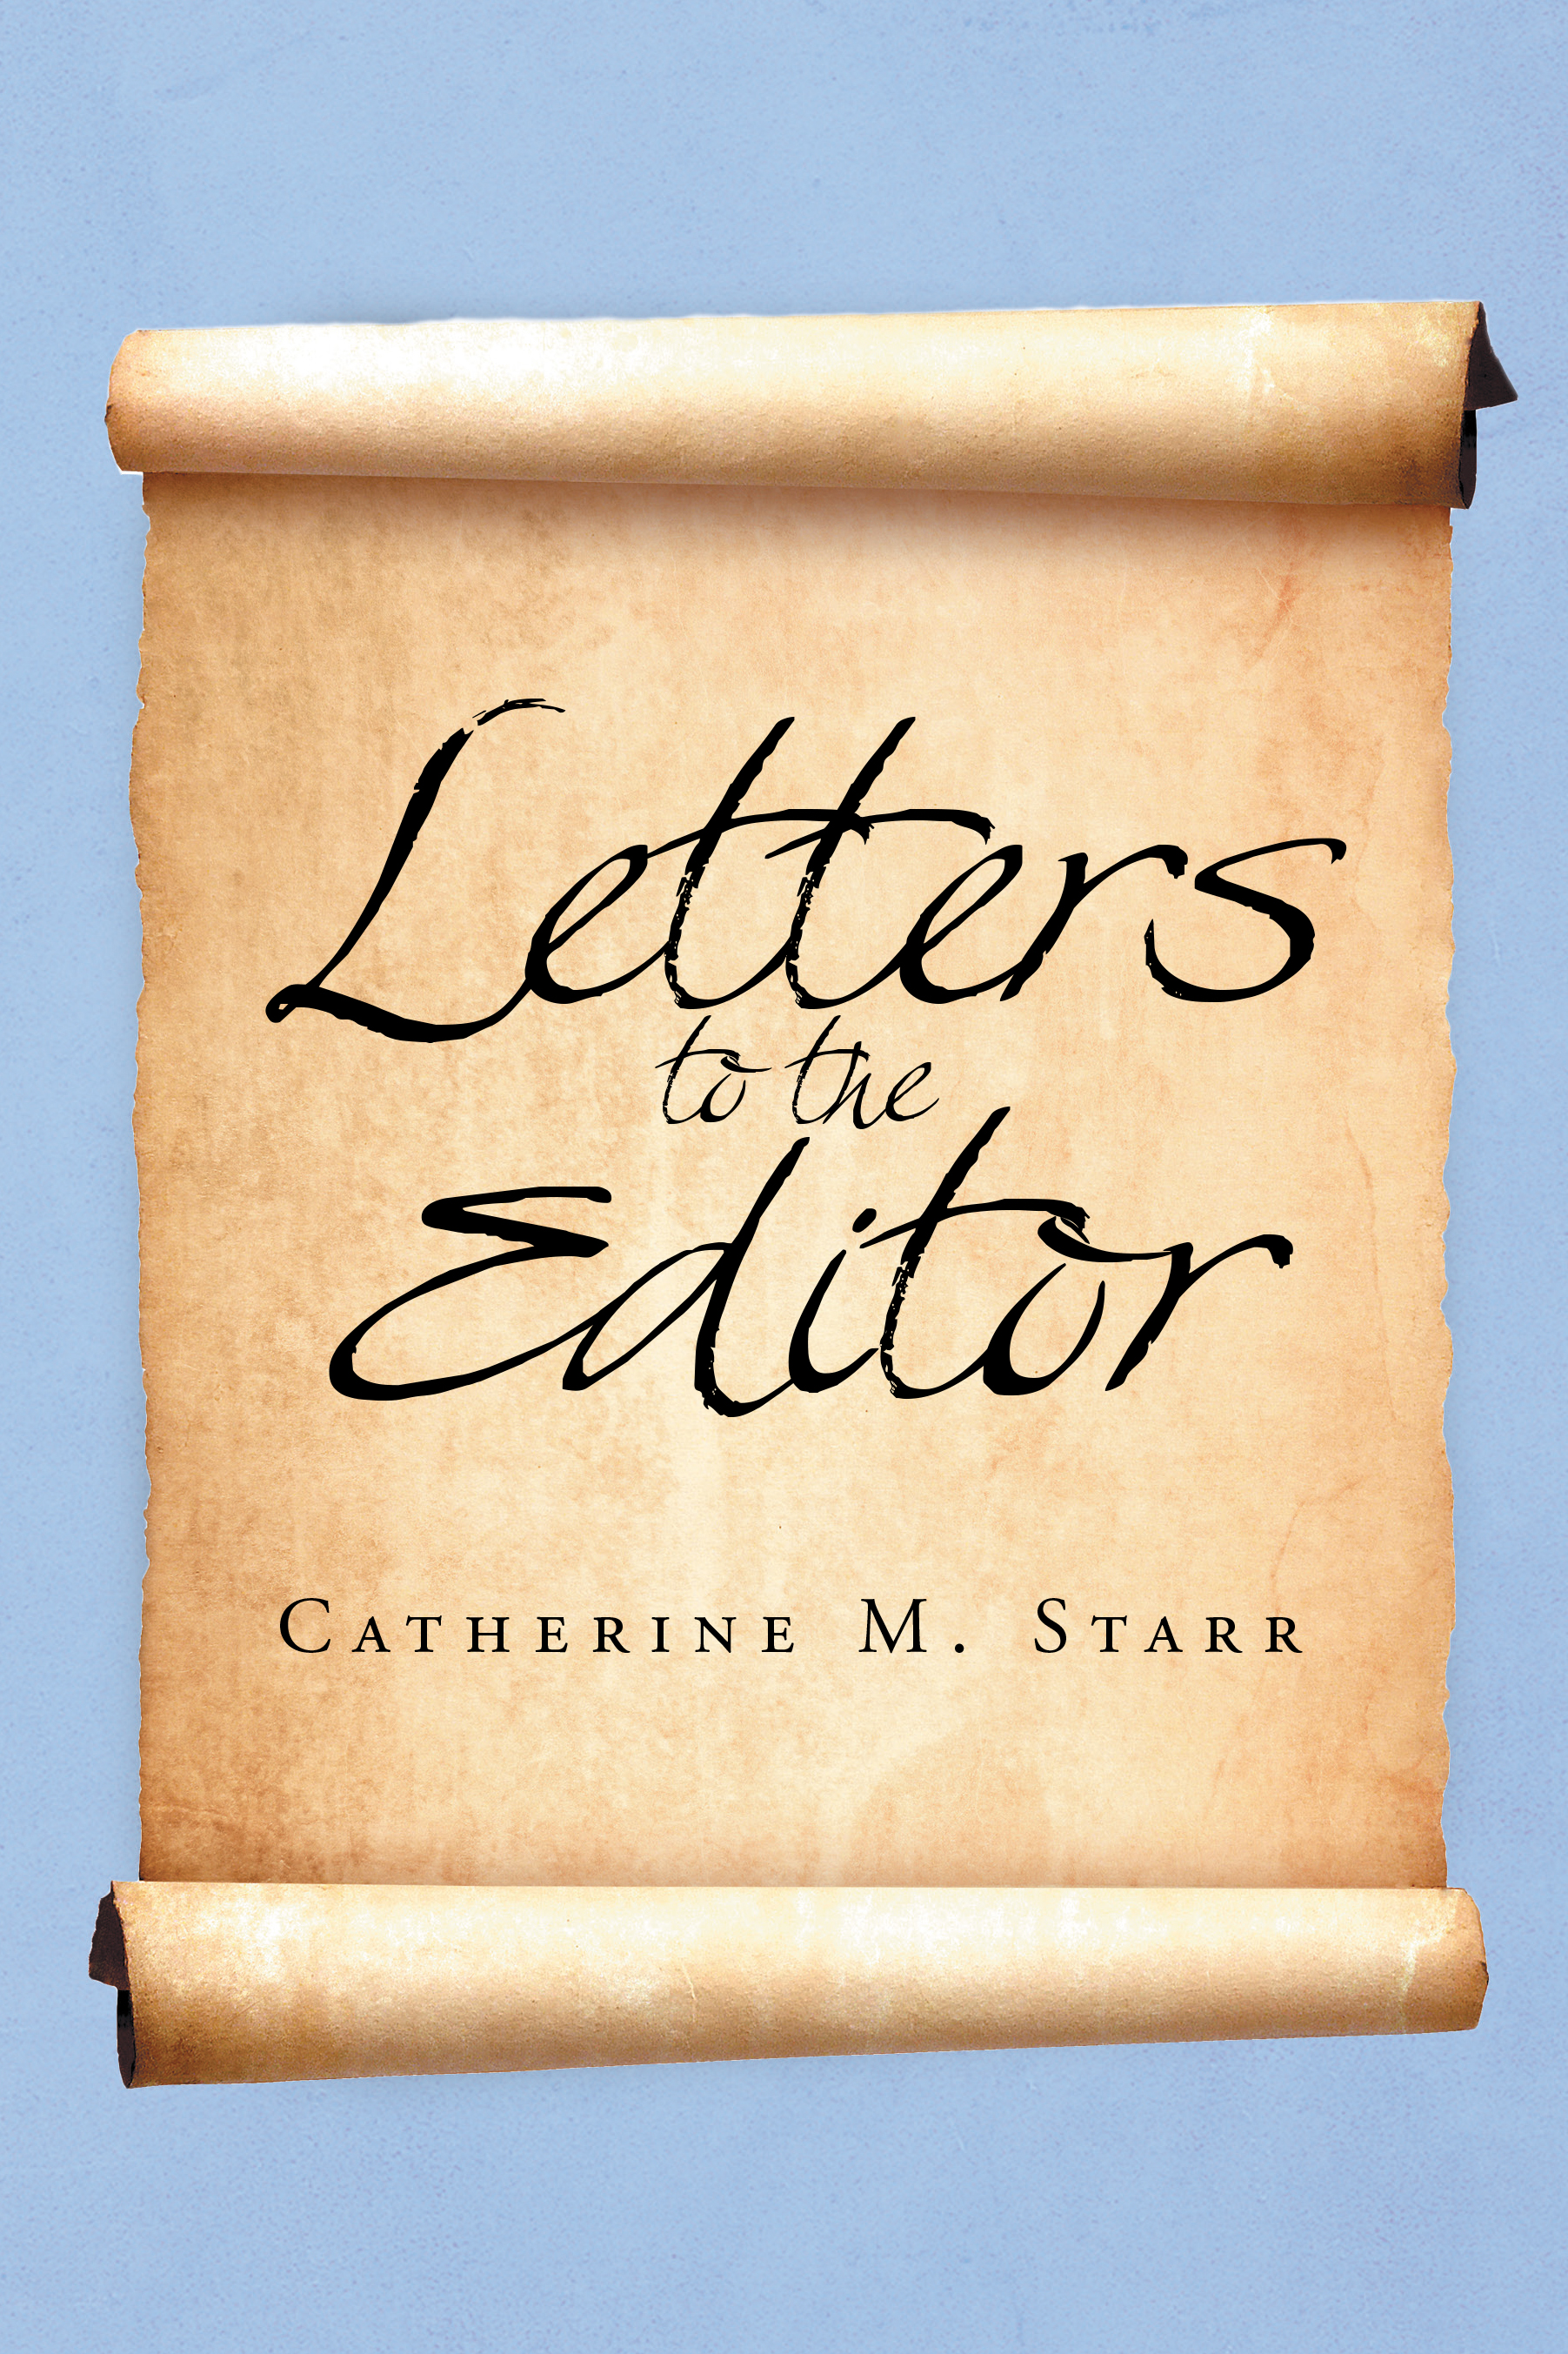 My Collection of Letters to the Editor Cover Image